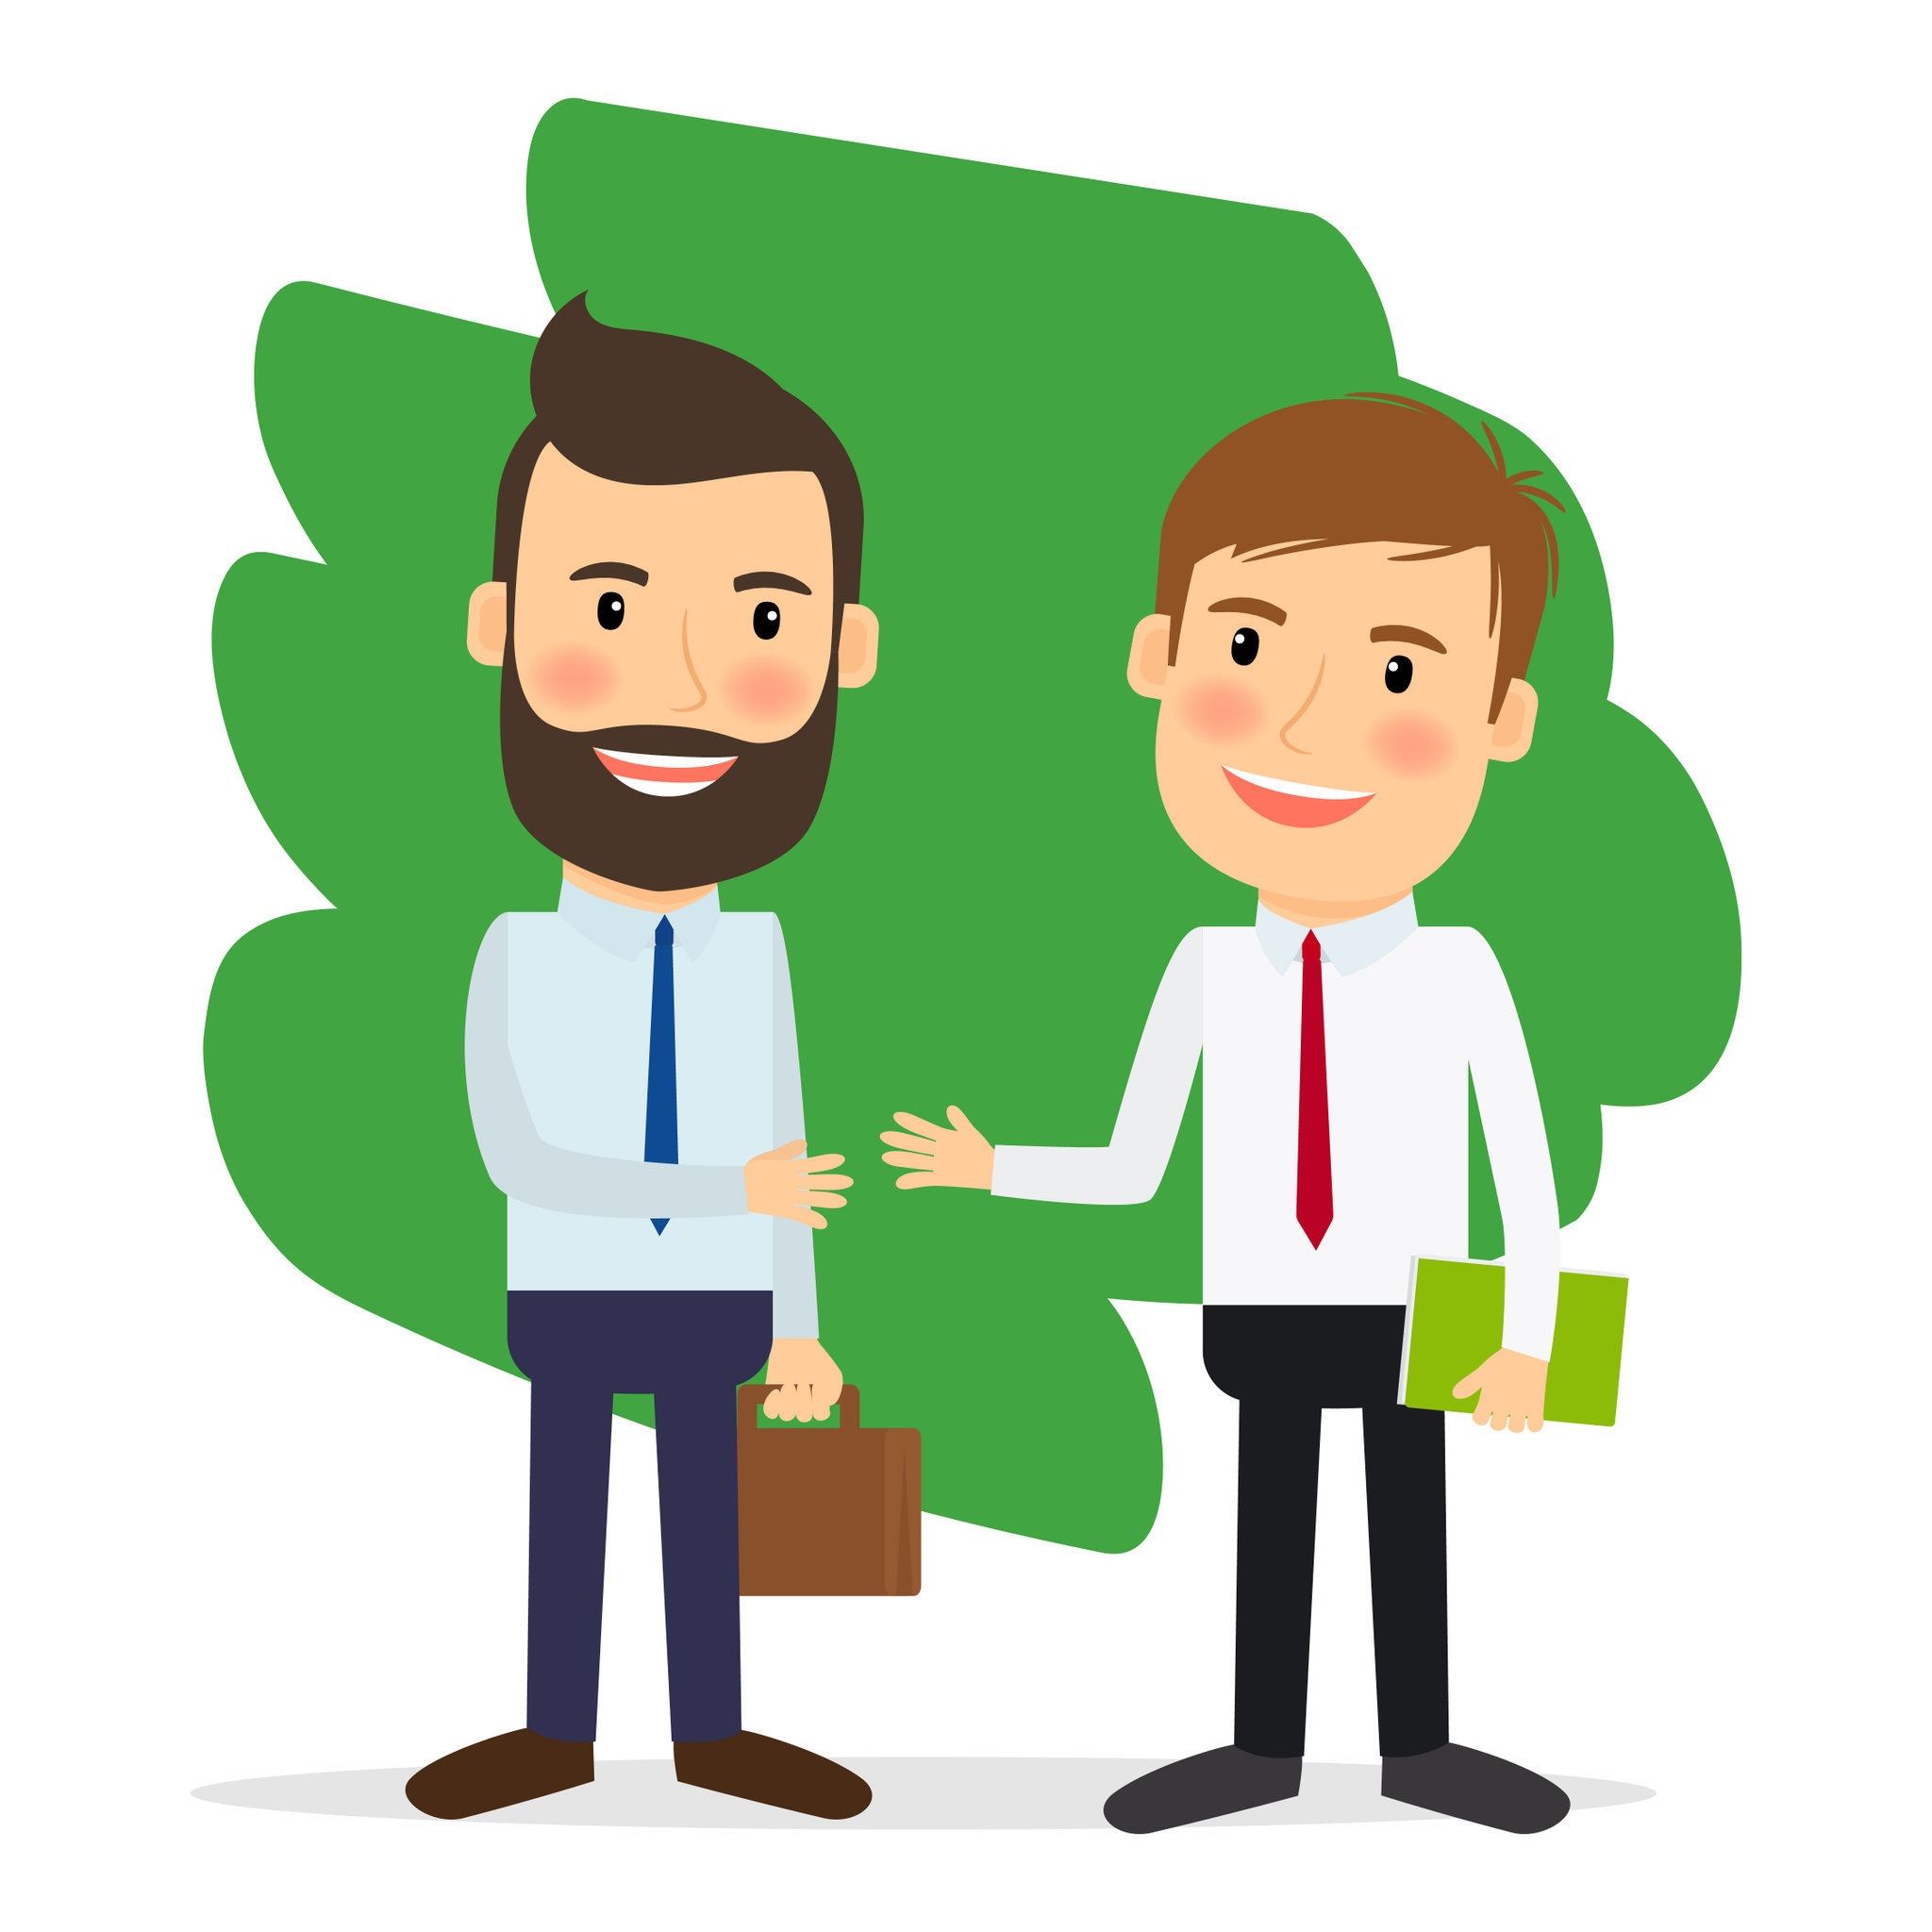 Business Deal. Business People Shaking Hands Or Achiving Agreement. Vector Illustration.